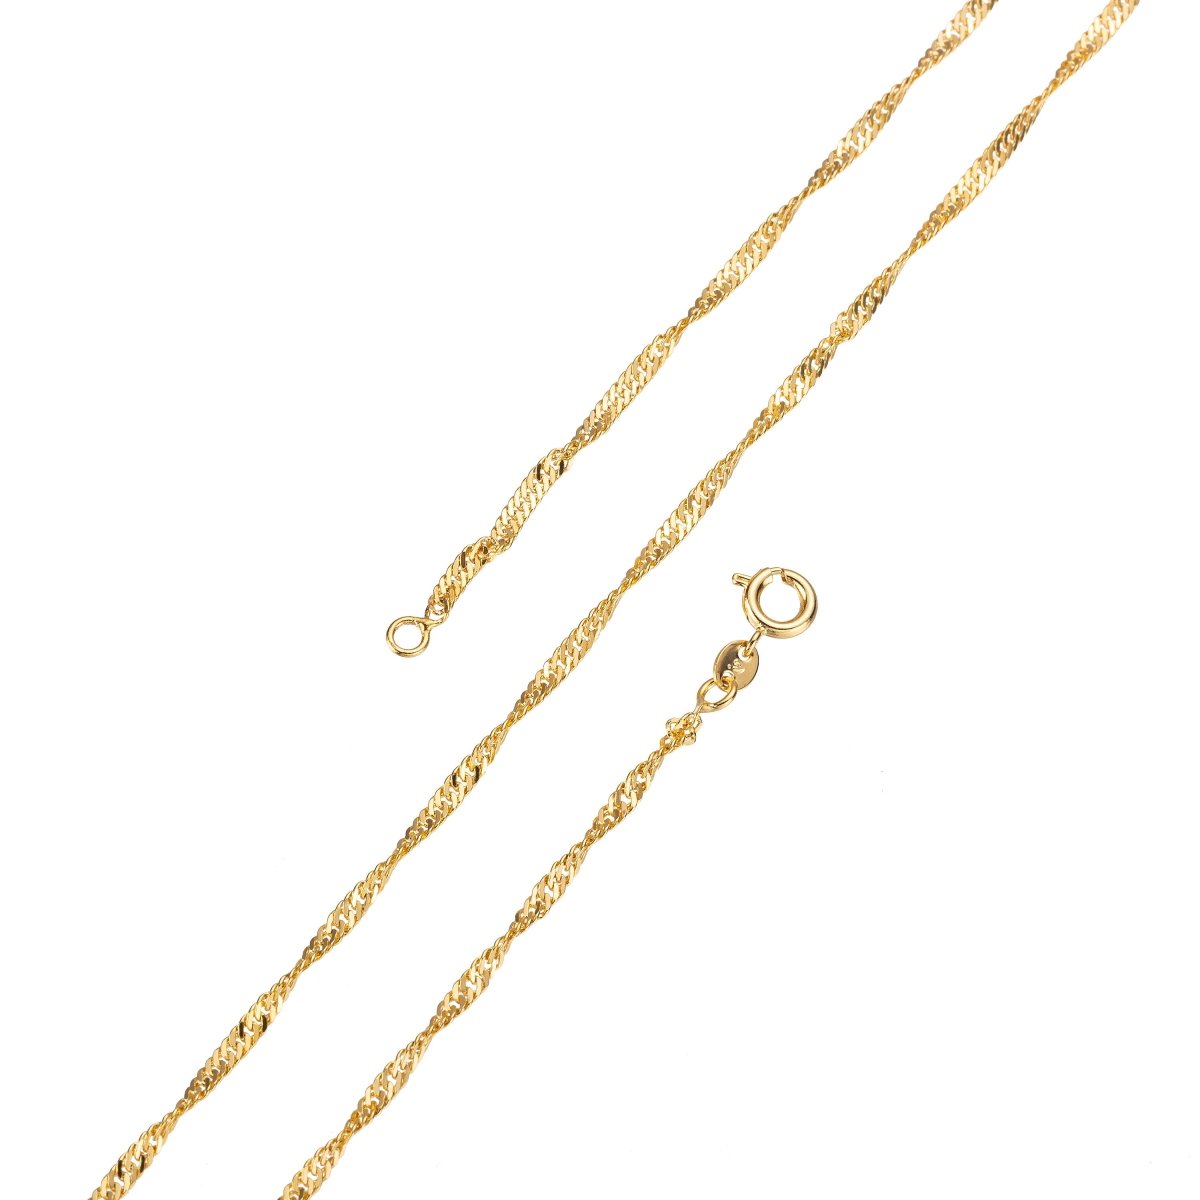 16 inch Singapore Finished Chain For Jewelry Making, 24K Gold Plated Singapore Chain Necklace, Dainty 2mm Singapore Necklace w/ Spring Ring | CN-747 Clearance Pricing - DLUXCA